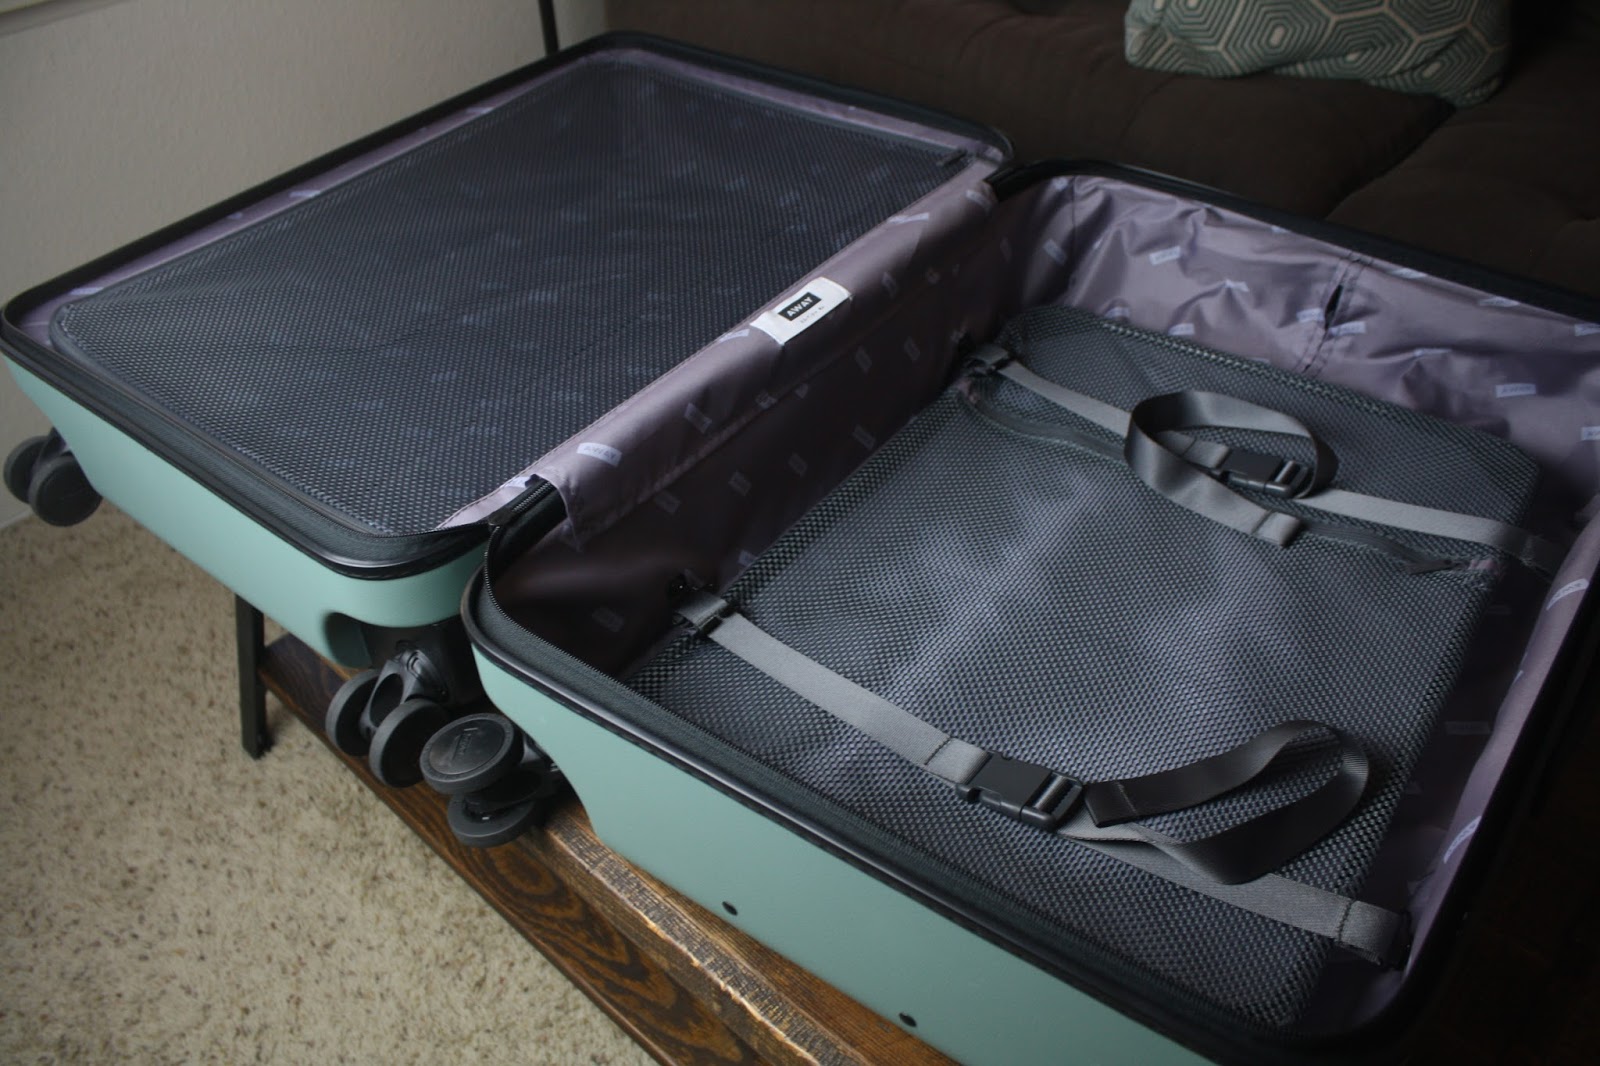 Kayla June: Away Luggage Review